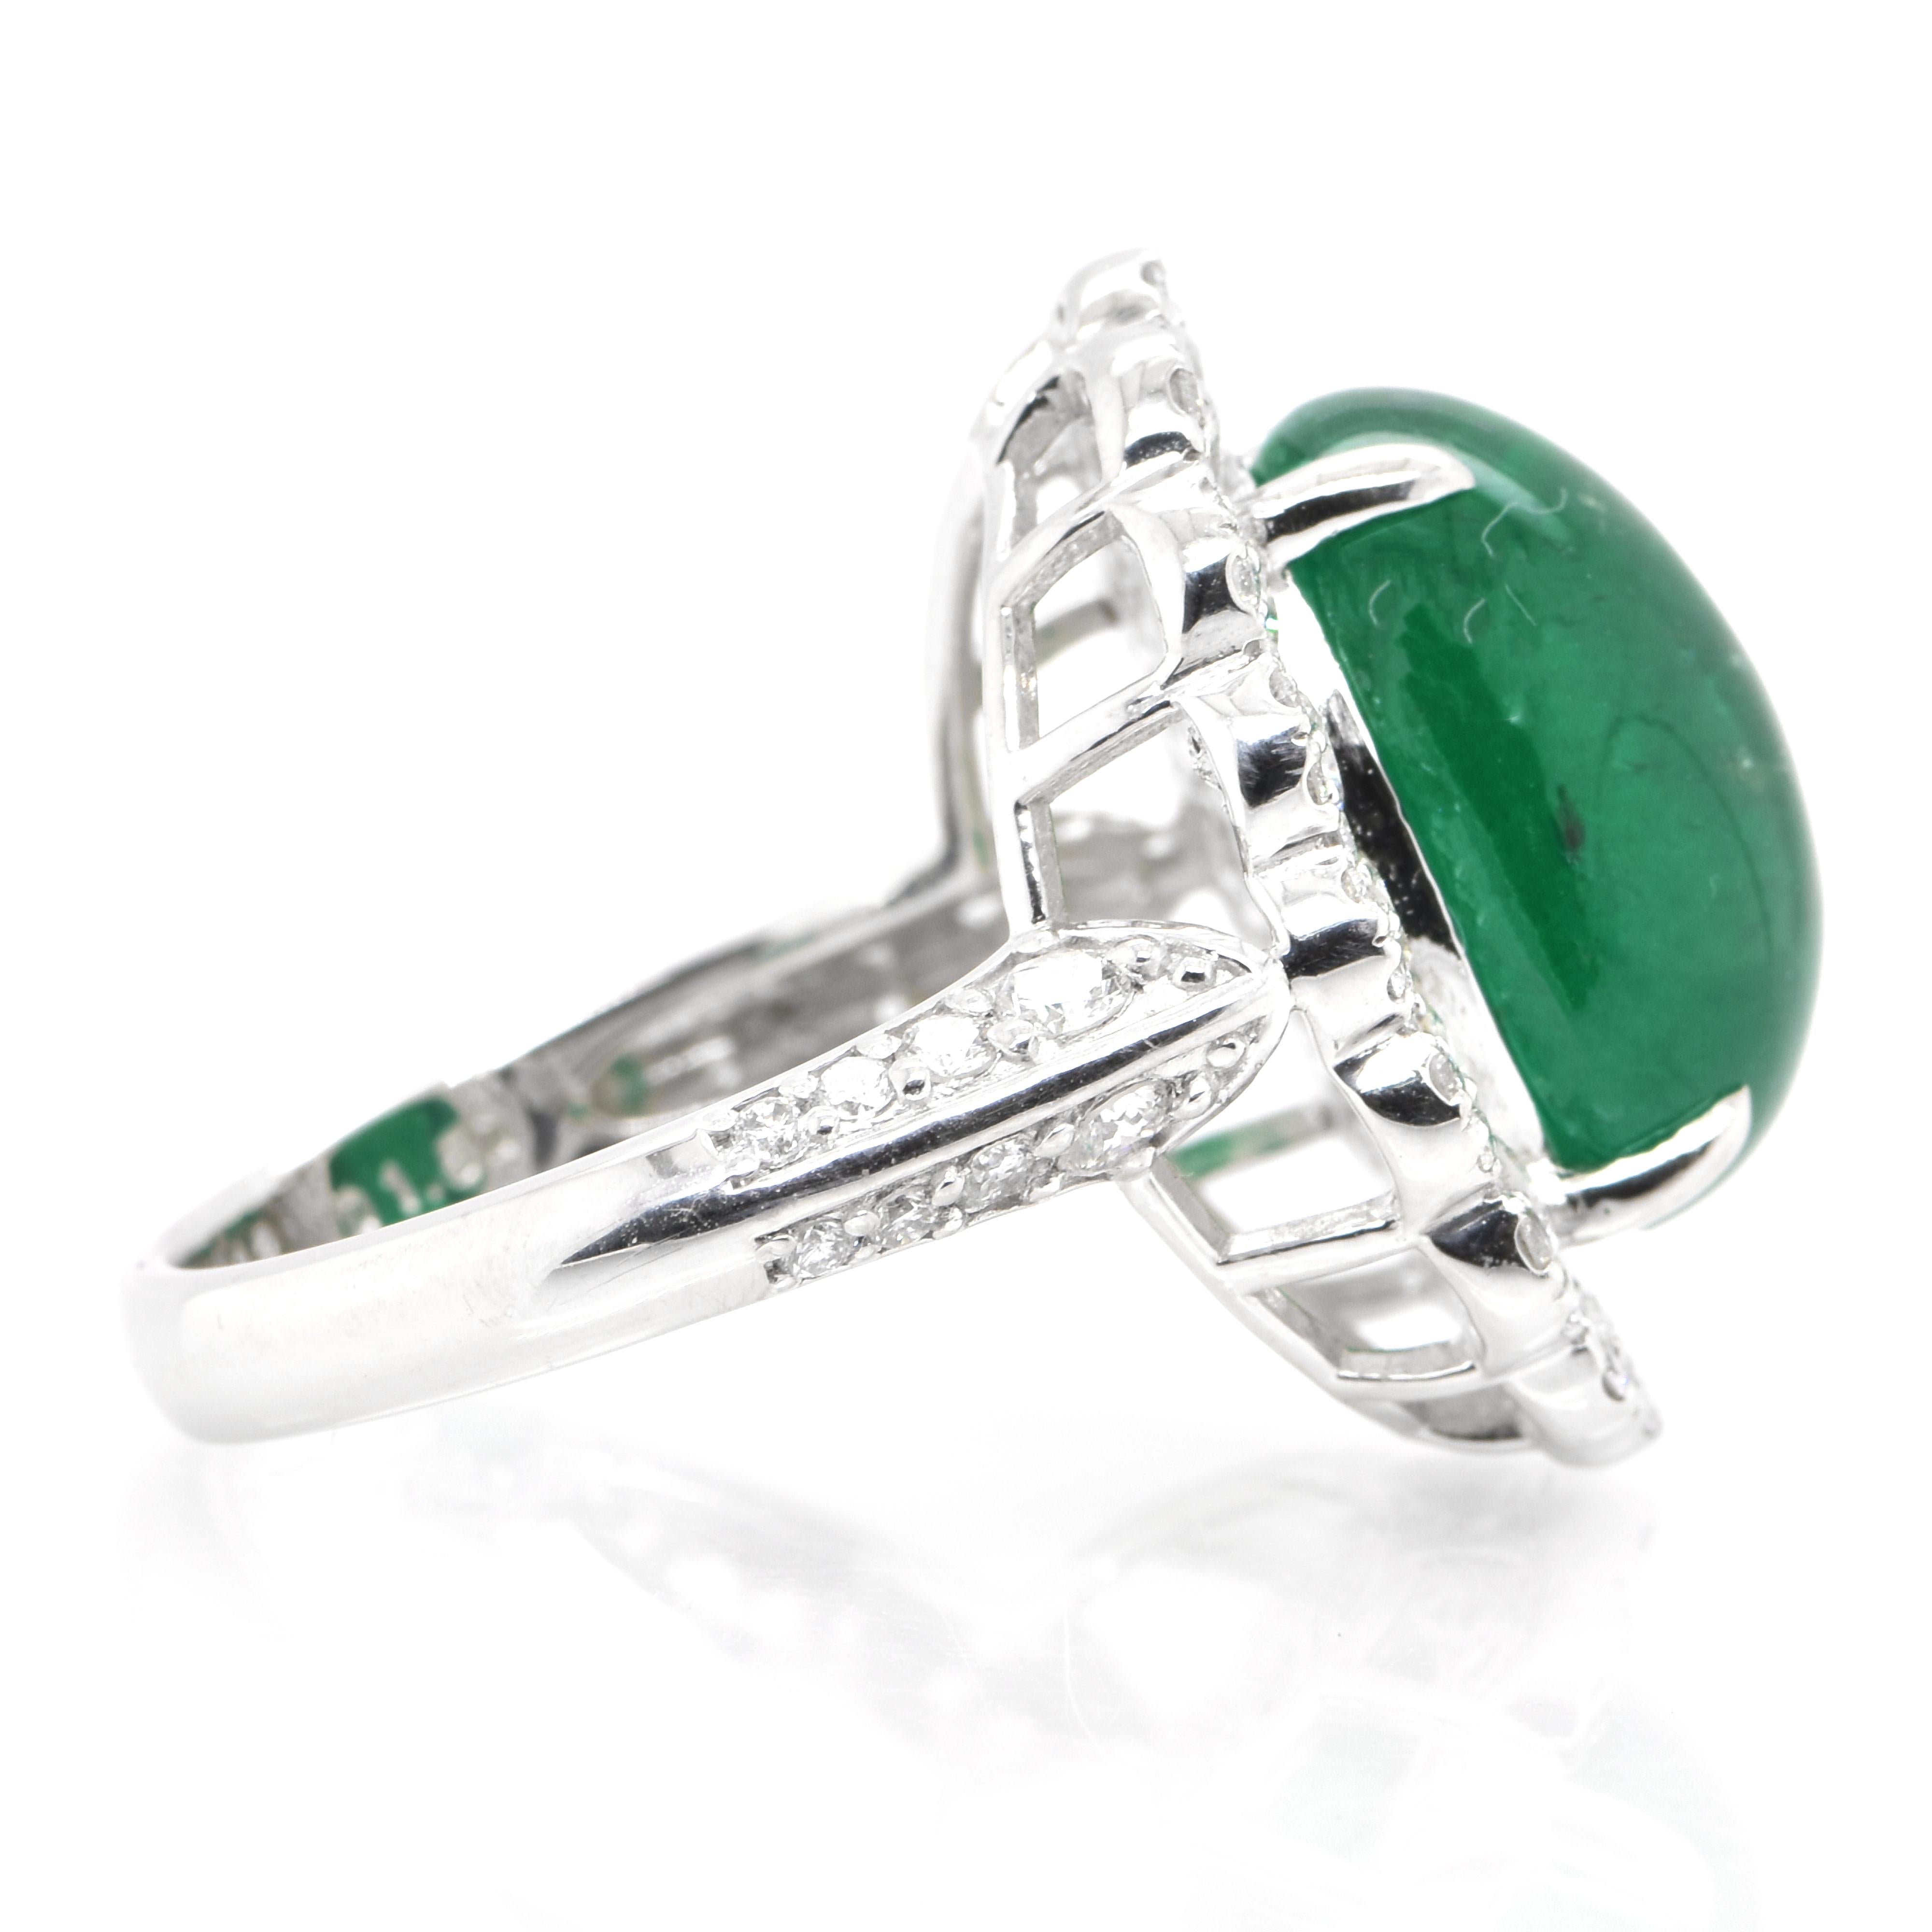 Women's 8.18 Carat Natural African Emerald Cabochon and Diamond Ring Set in Platinum For Sale